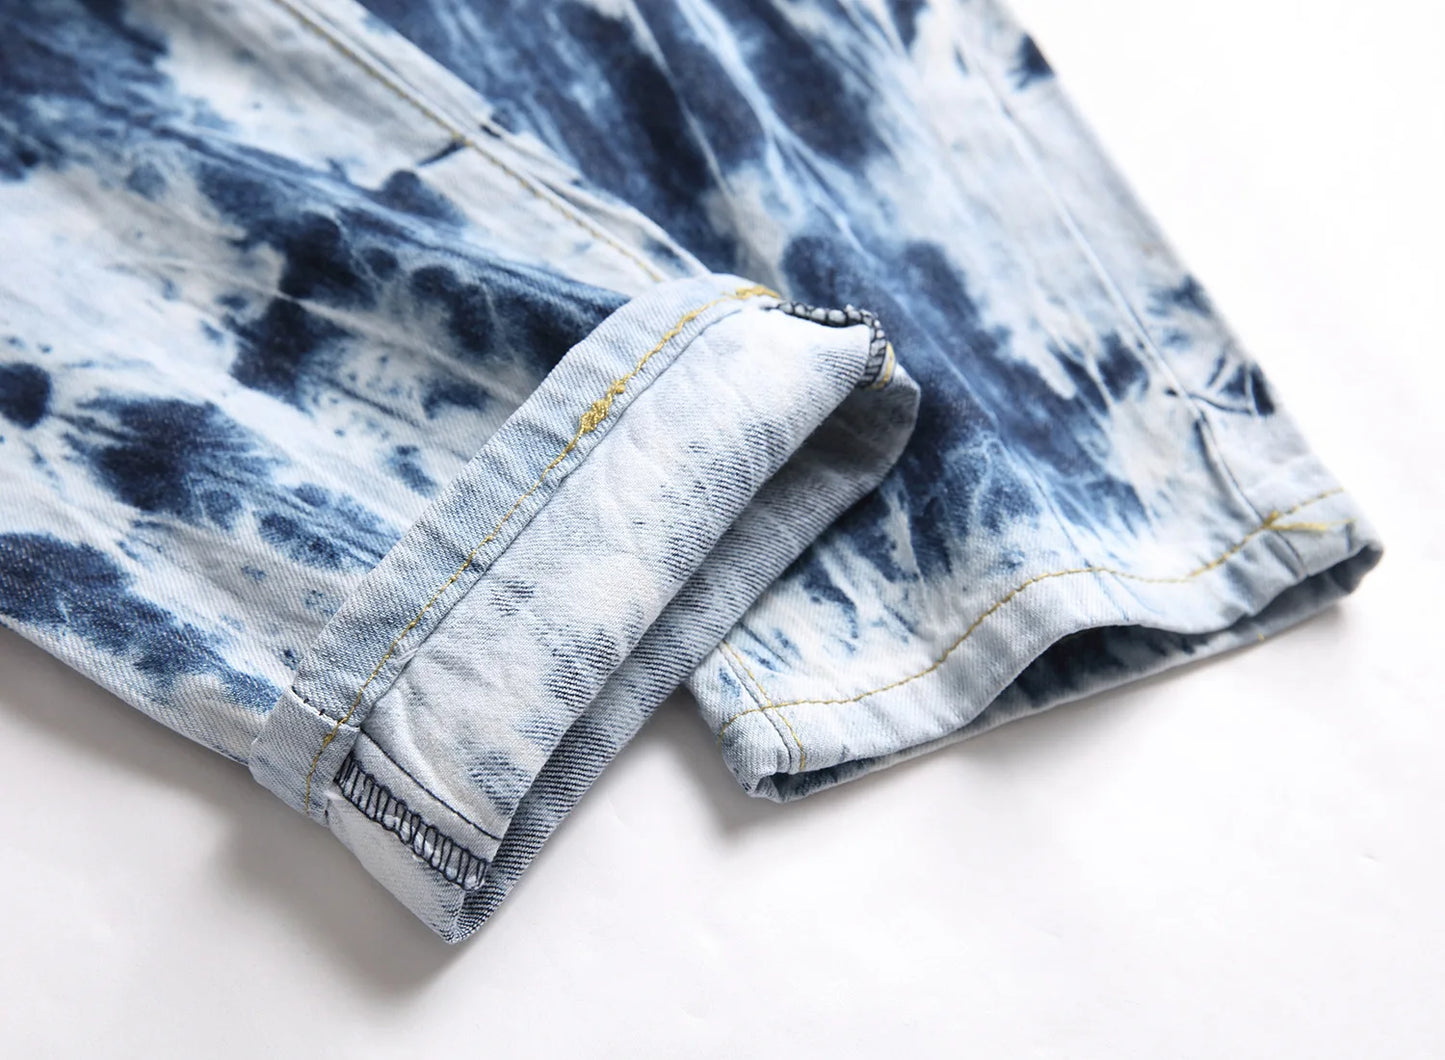 Men’s High Quality Tie-dyed Blue Jeans Slim-fit Ripped Jeans